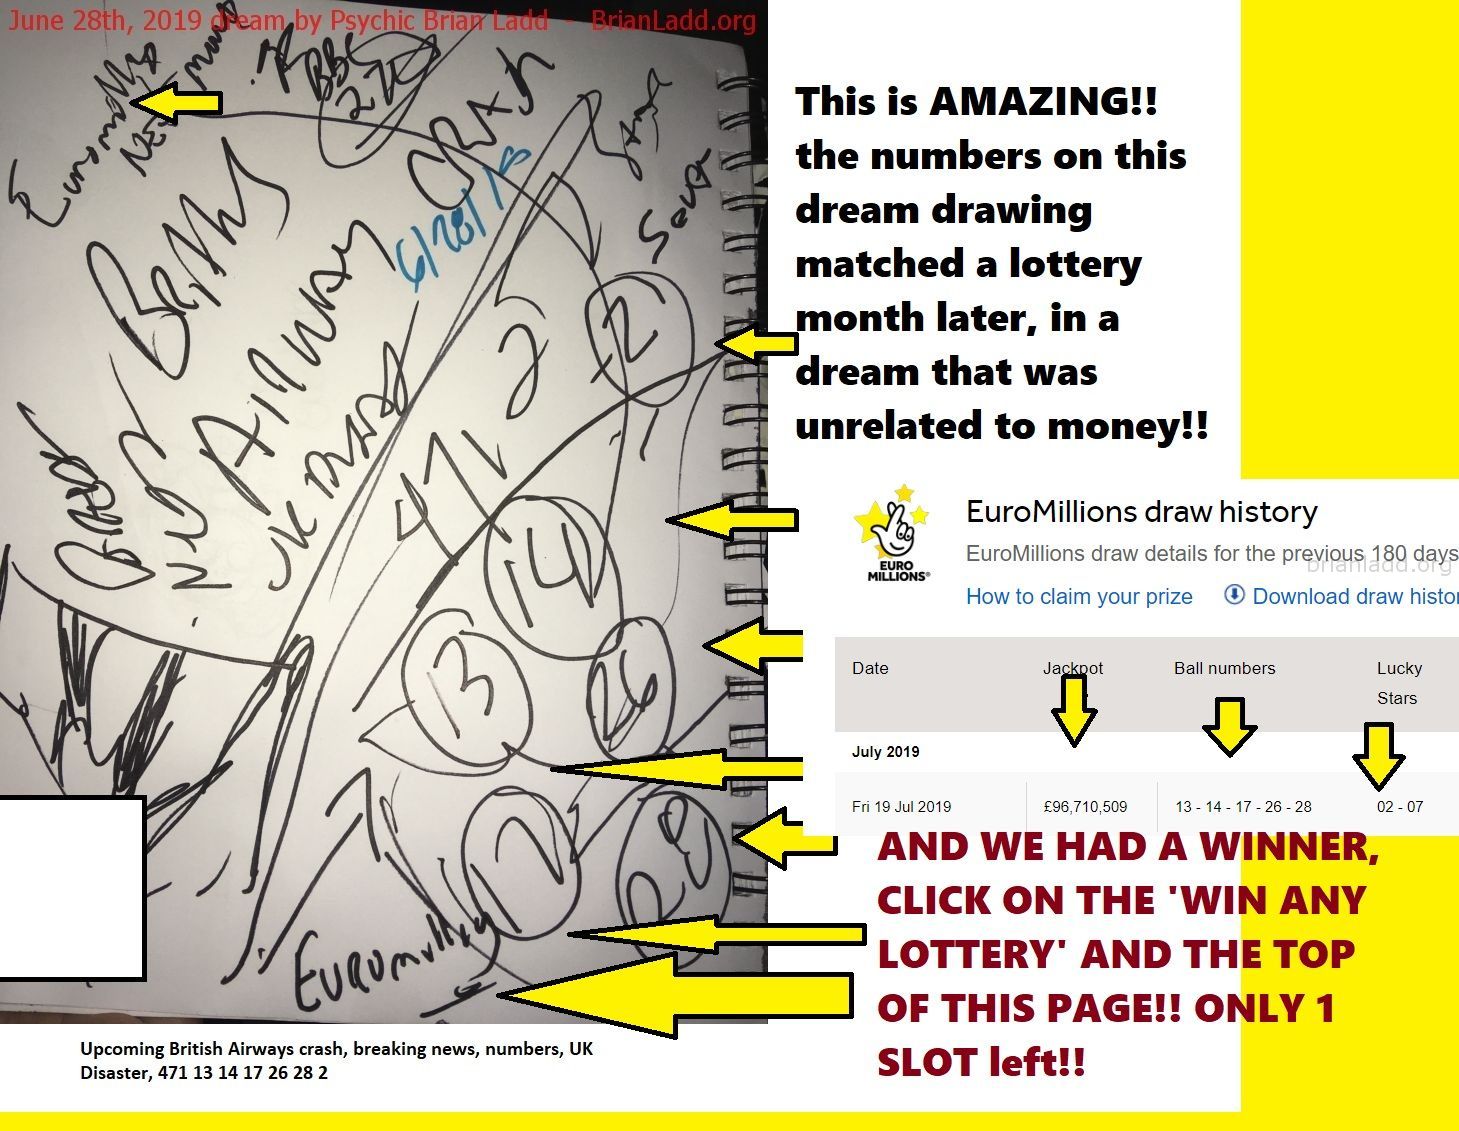 Euromillions Lottery Winning Numbers - This Is Amazing!! The Numbers On This Dream Drawing Matched A Lottery Month Later...
This Is Amazing!! The Numbers On This Dream Drawing Matched A Lottery Month Later, In A Dream That Was Unrelated To Money!!  Sign Up To Win 10 Million Usd Or More Guaranteed Lottery Win At   https://briansprediction.com/Private-Reading.Php  Only 1 Slot Left!!!
